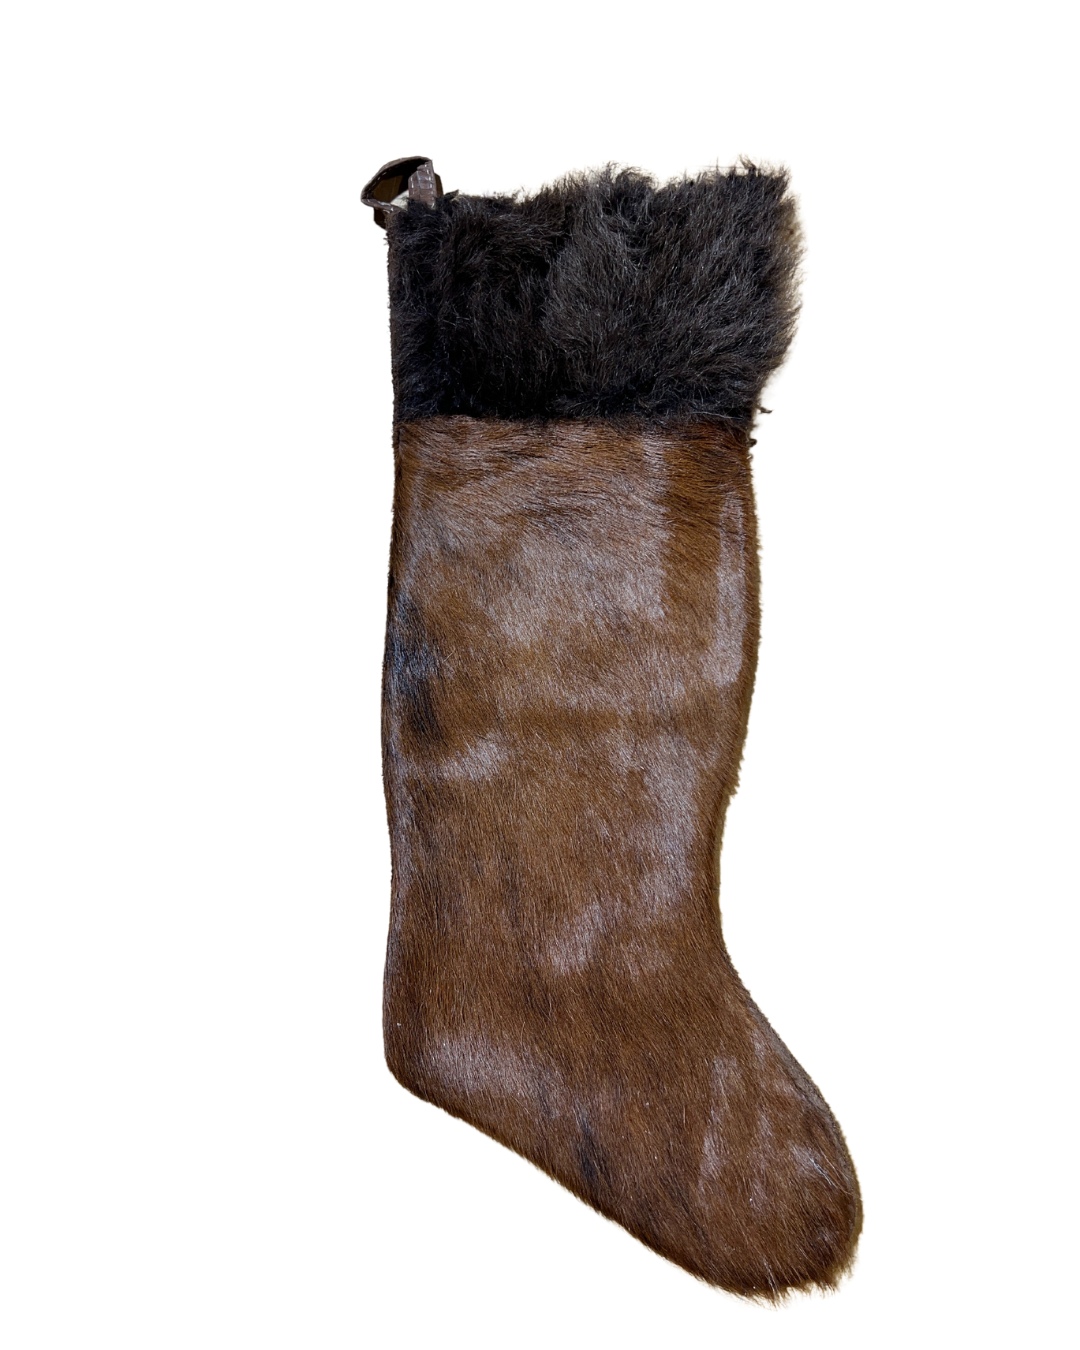 Cowhide Christmas Stocking - Brown & with Bison Hair - Large